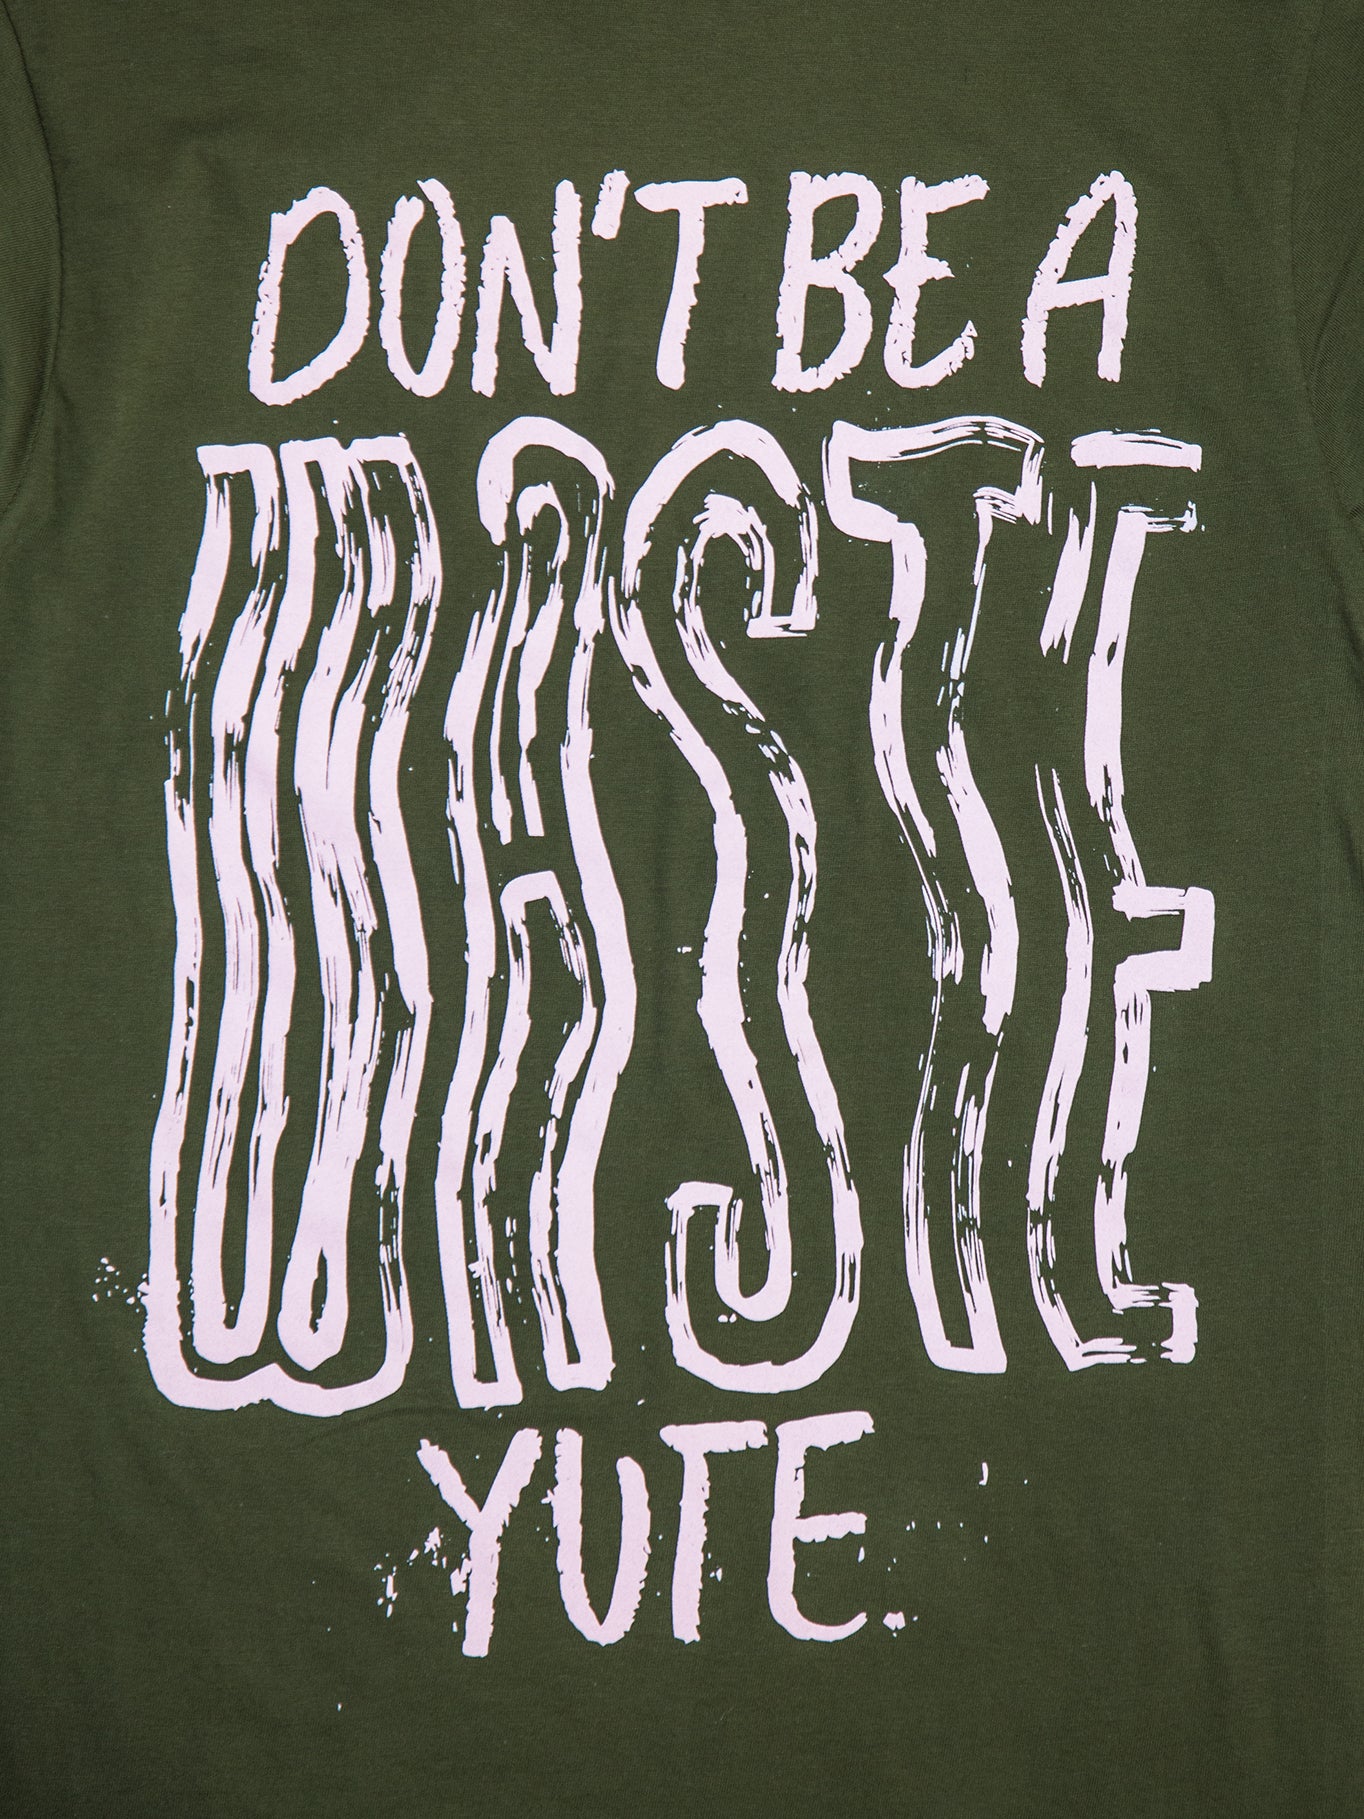 Full size image of handwritten "Don't Be A Waste Yute" design 